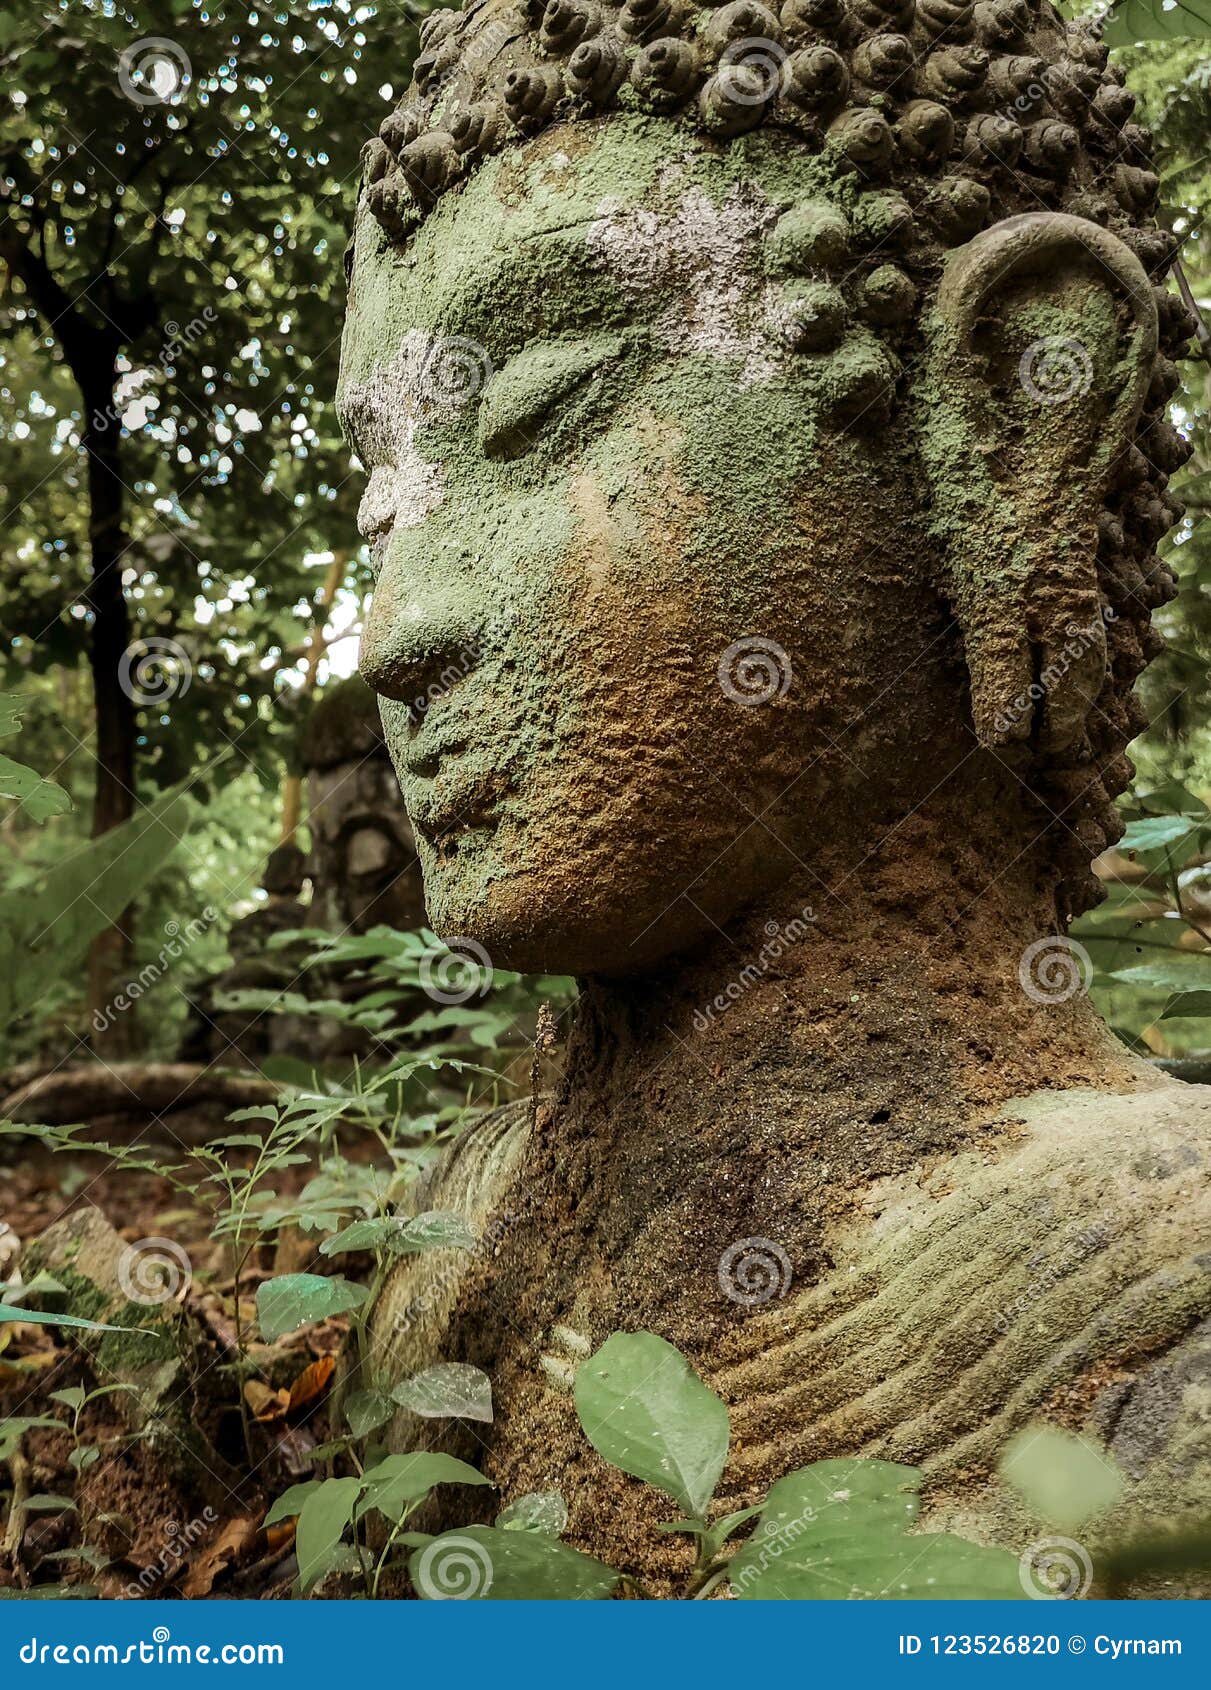 buddha vestige in green nature at wat umong, chiang mai, thailand, green buddha portrait covered with moss